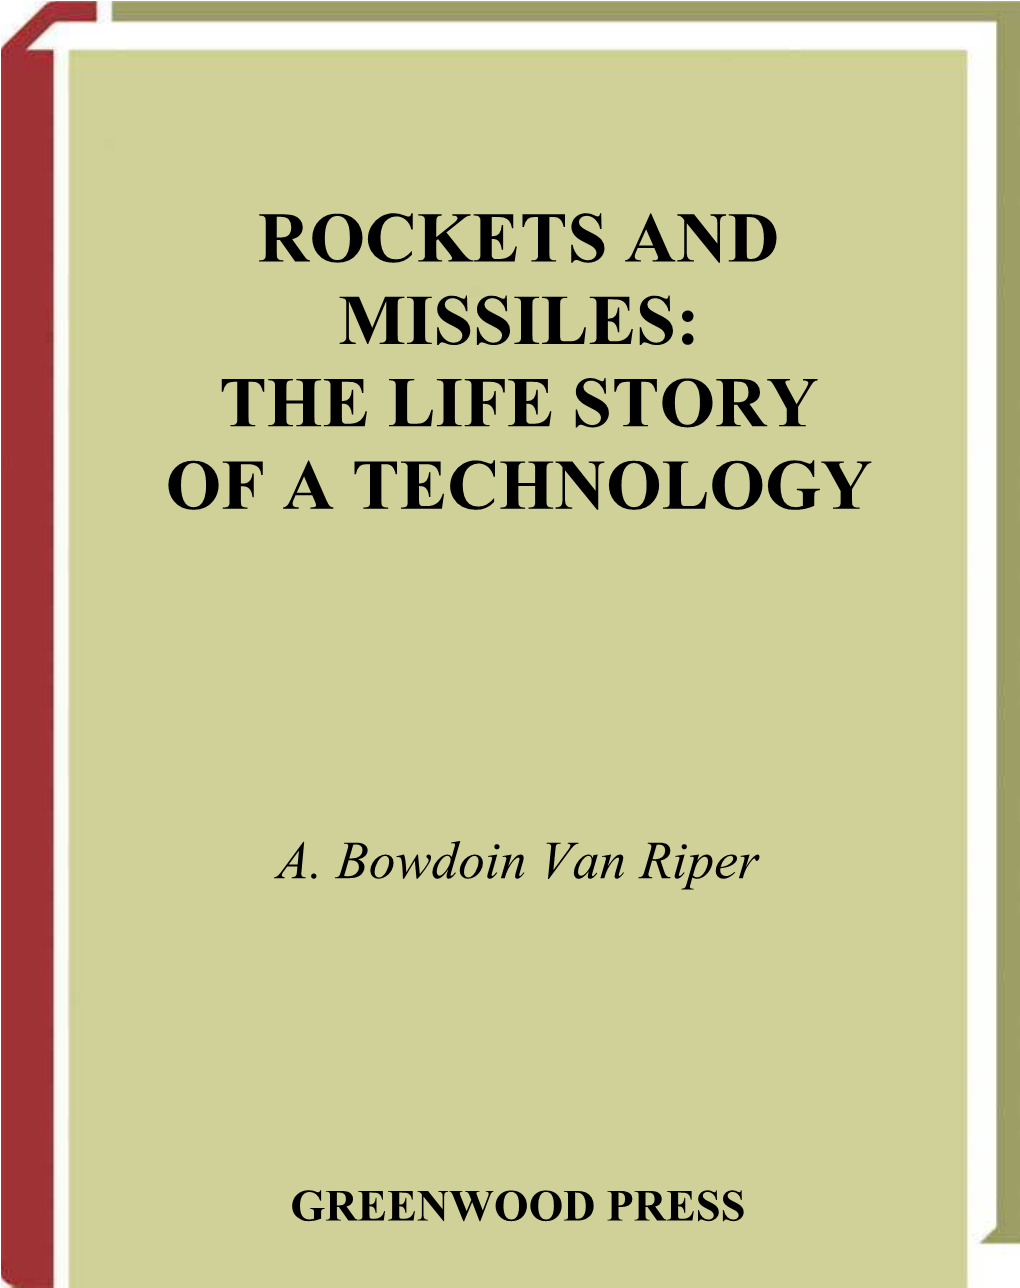 Rockets and Missiles: the Life Story of a Technology